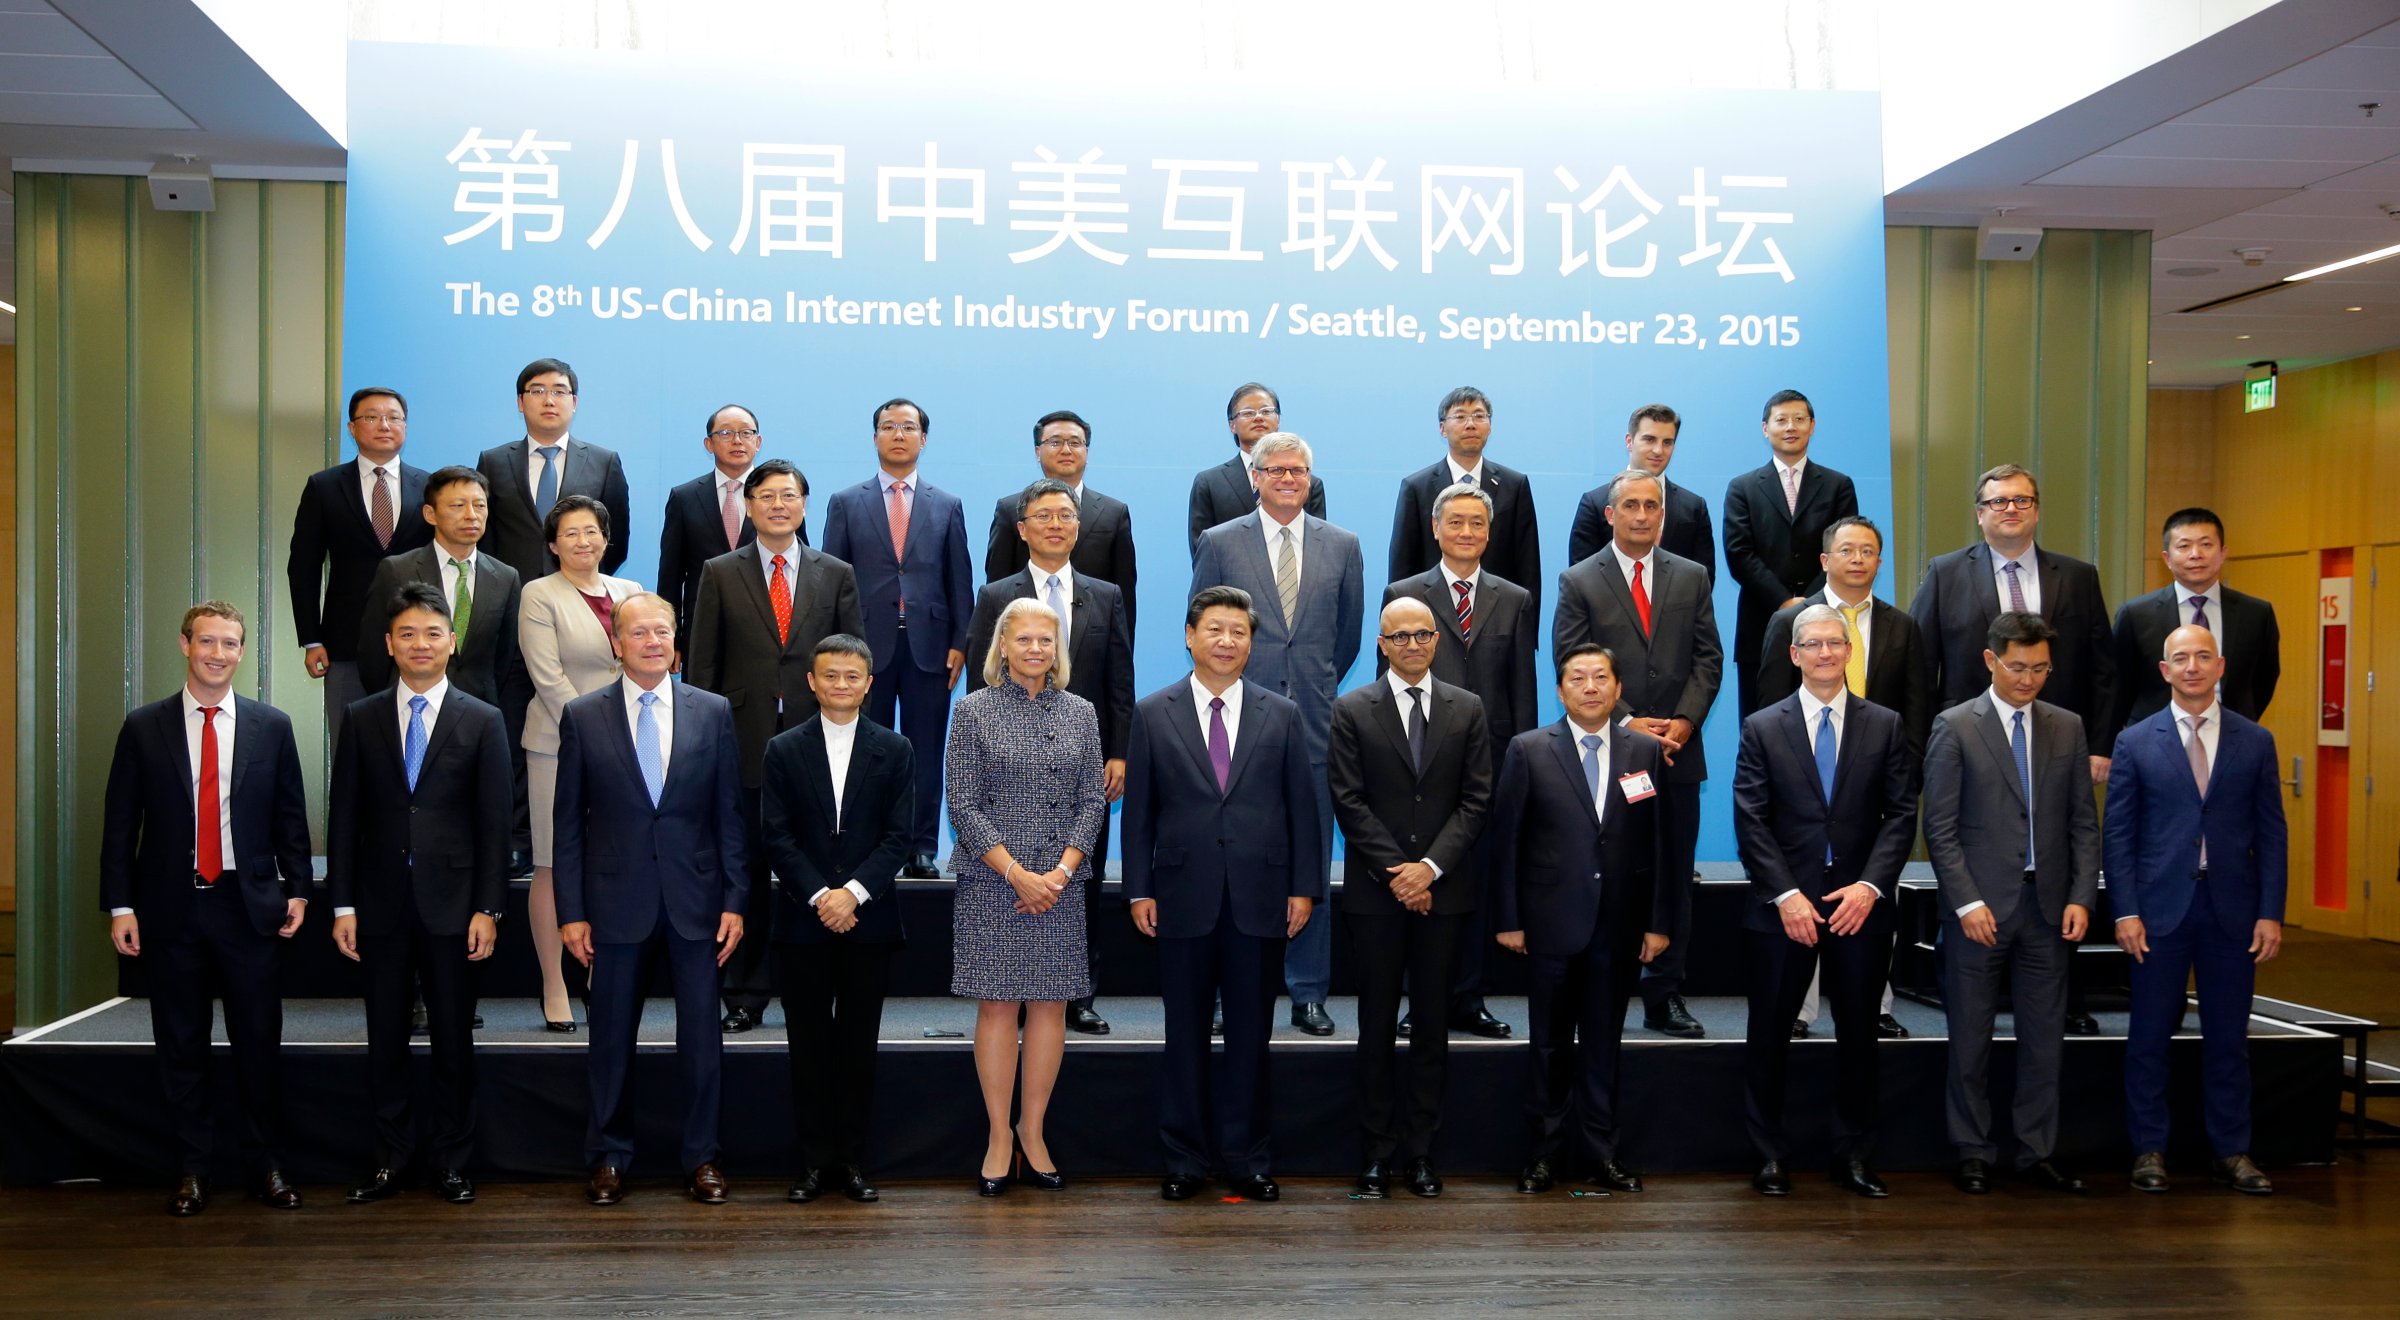 Chinese President Xi Jinping poses for a photo with a group of CEOs and other executives at Microsoft's main campus in Redmond Washington